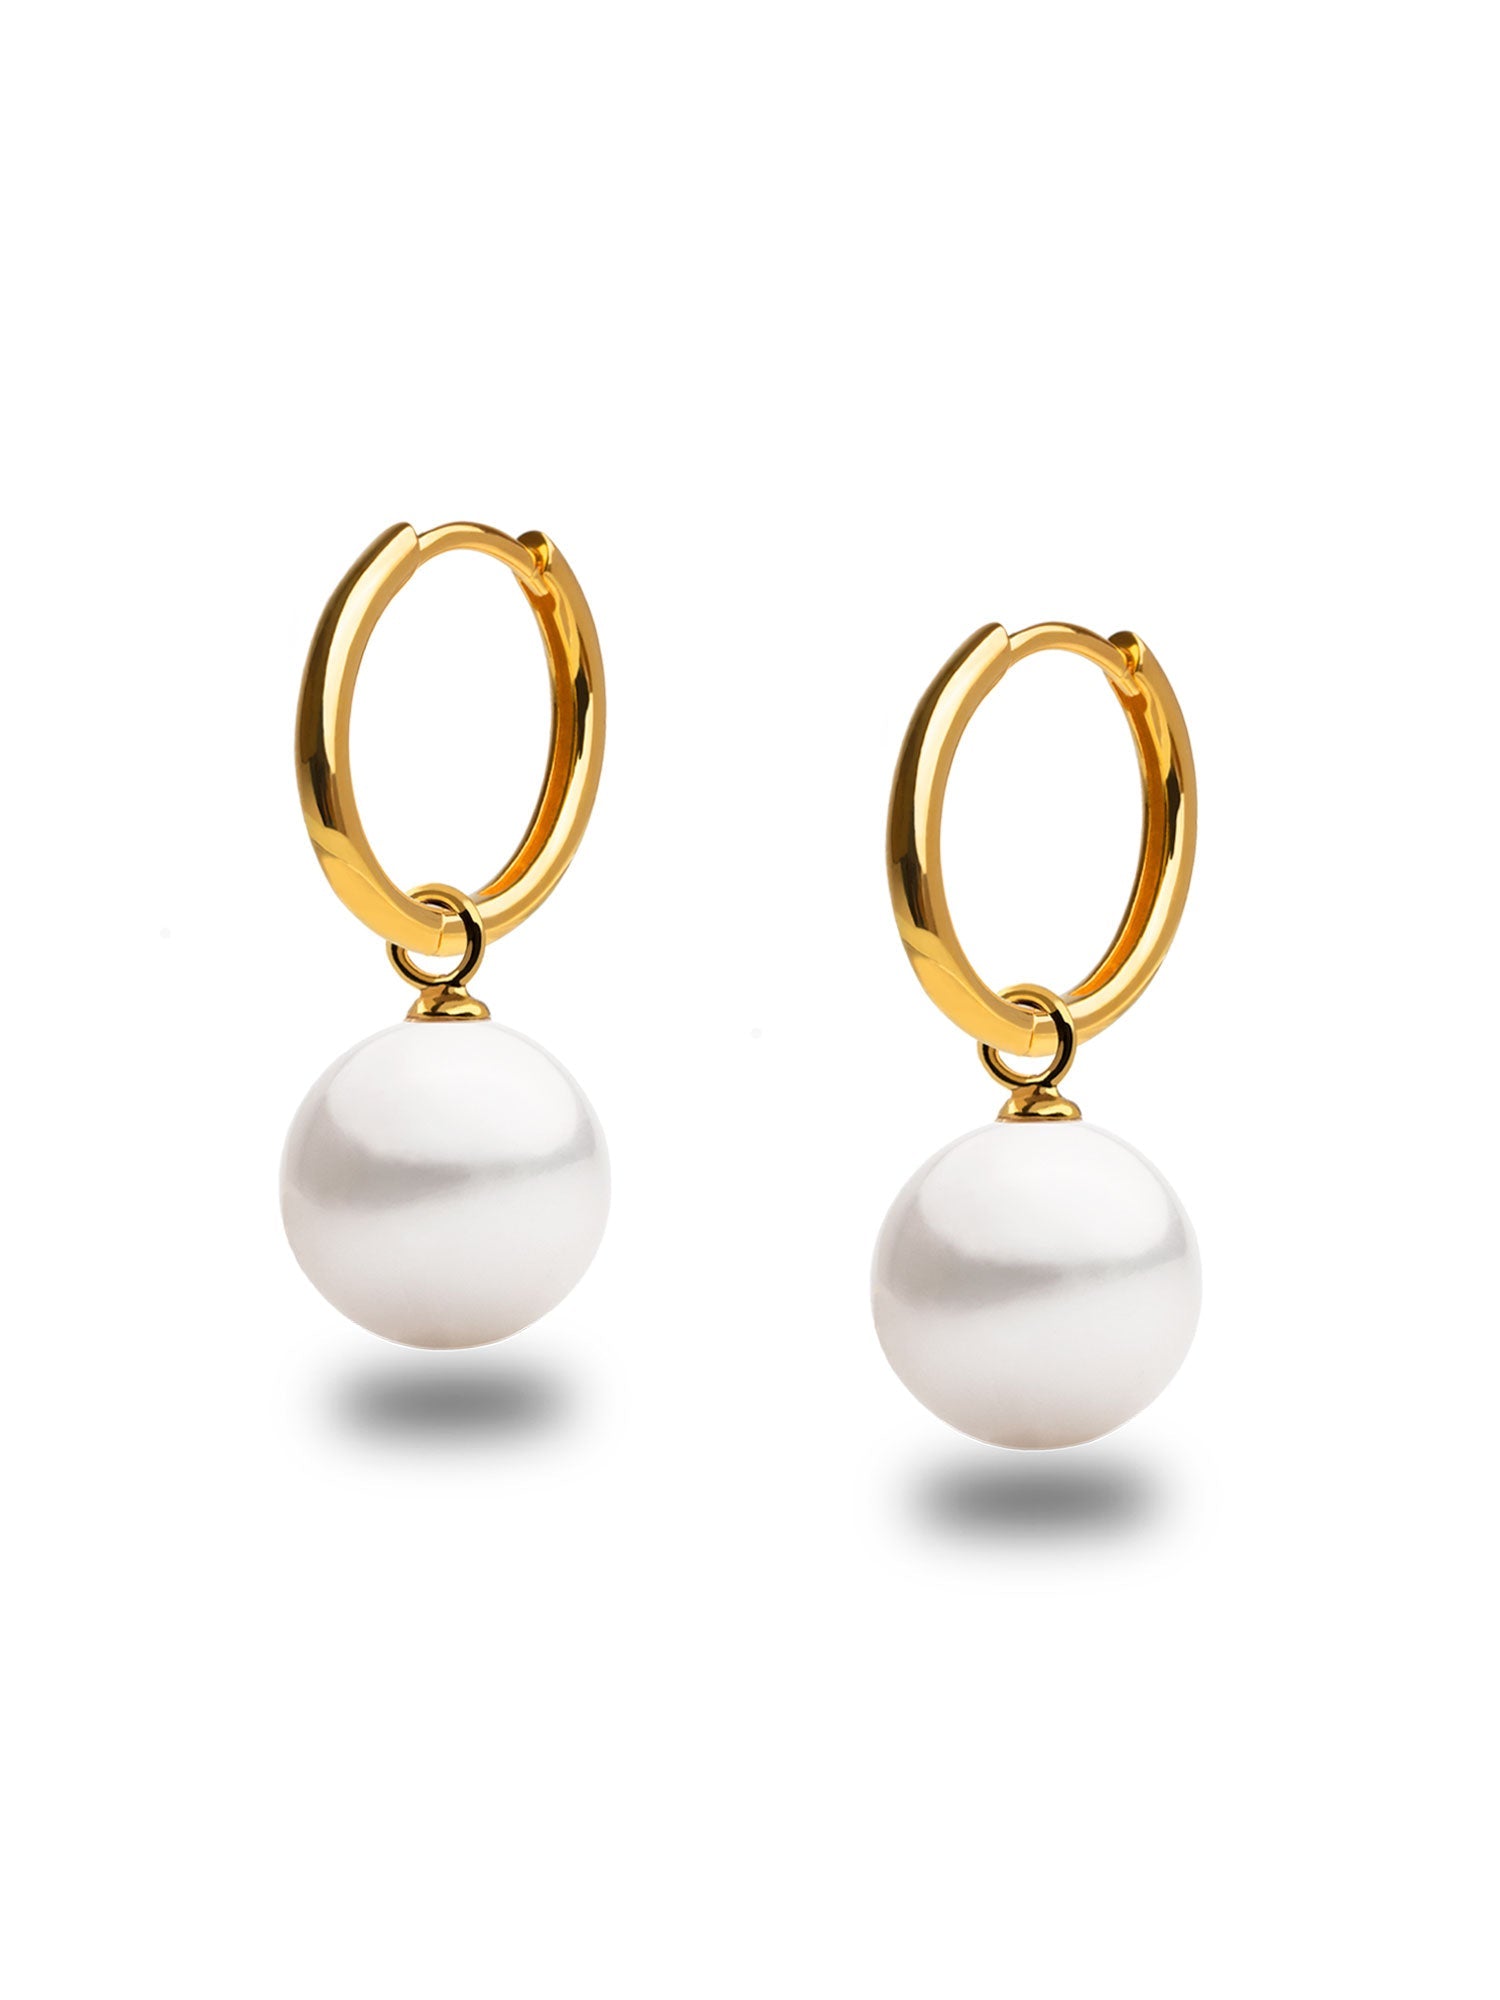 16mm Gold Vermeil Hoops with Round Pearl